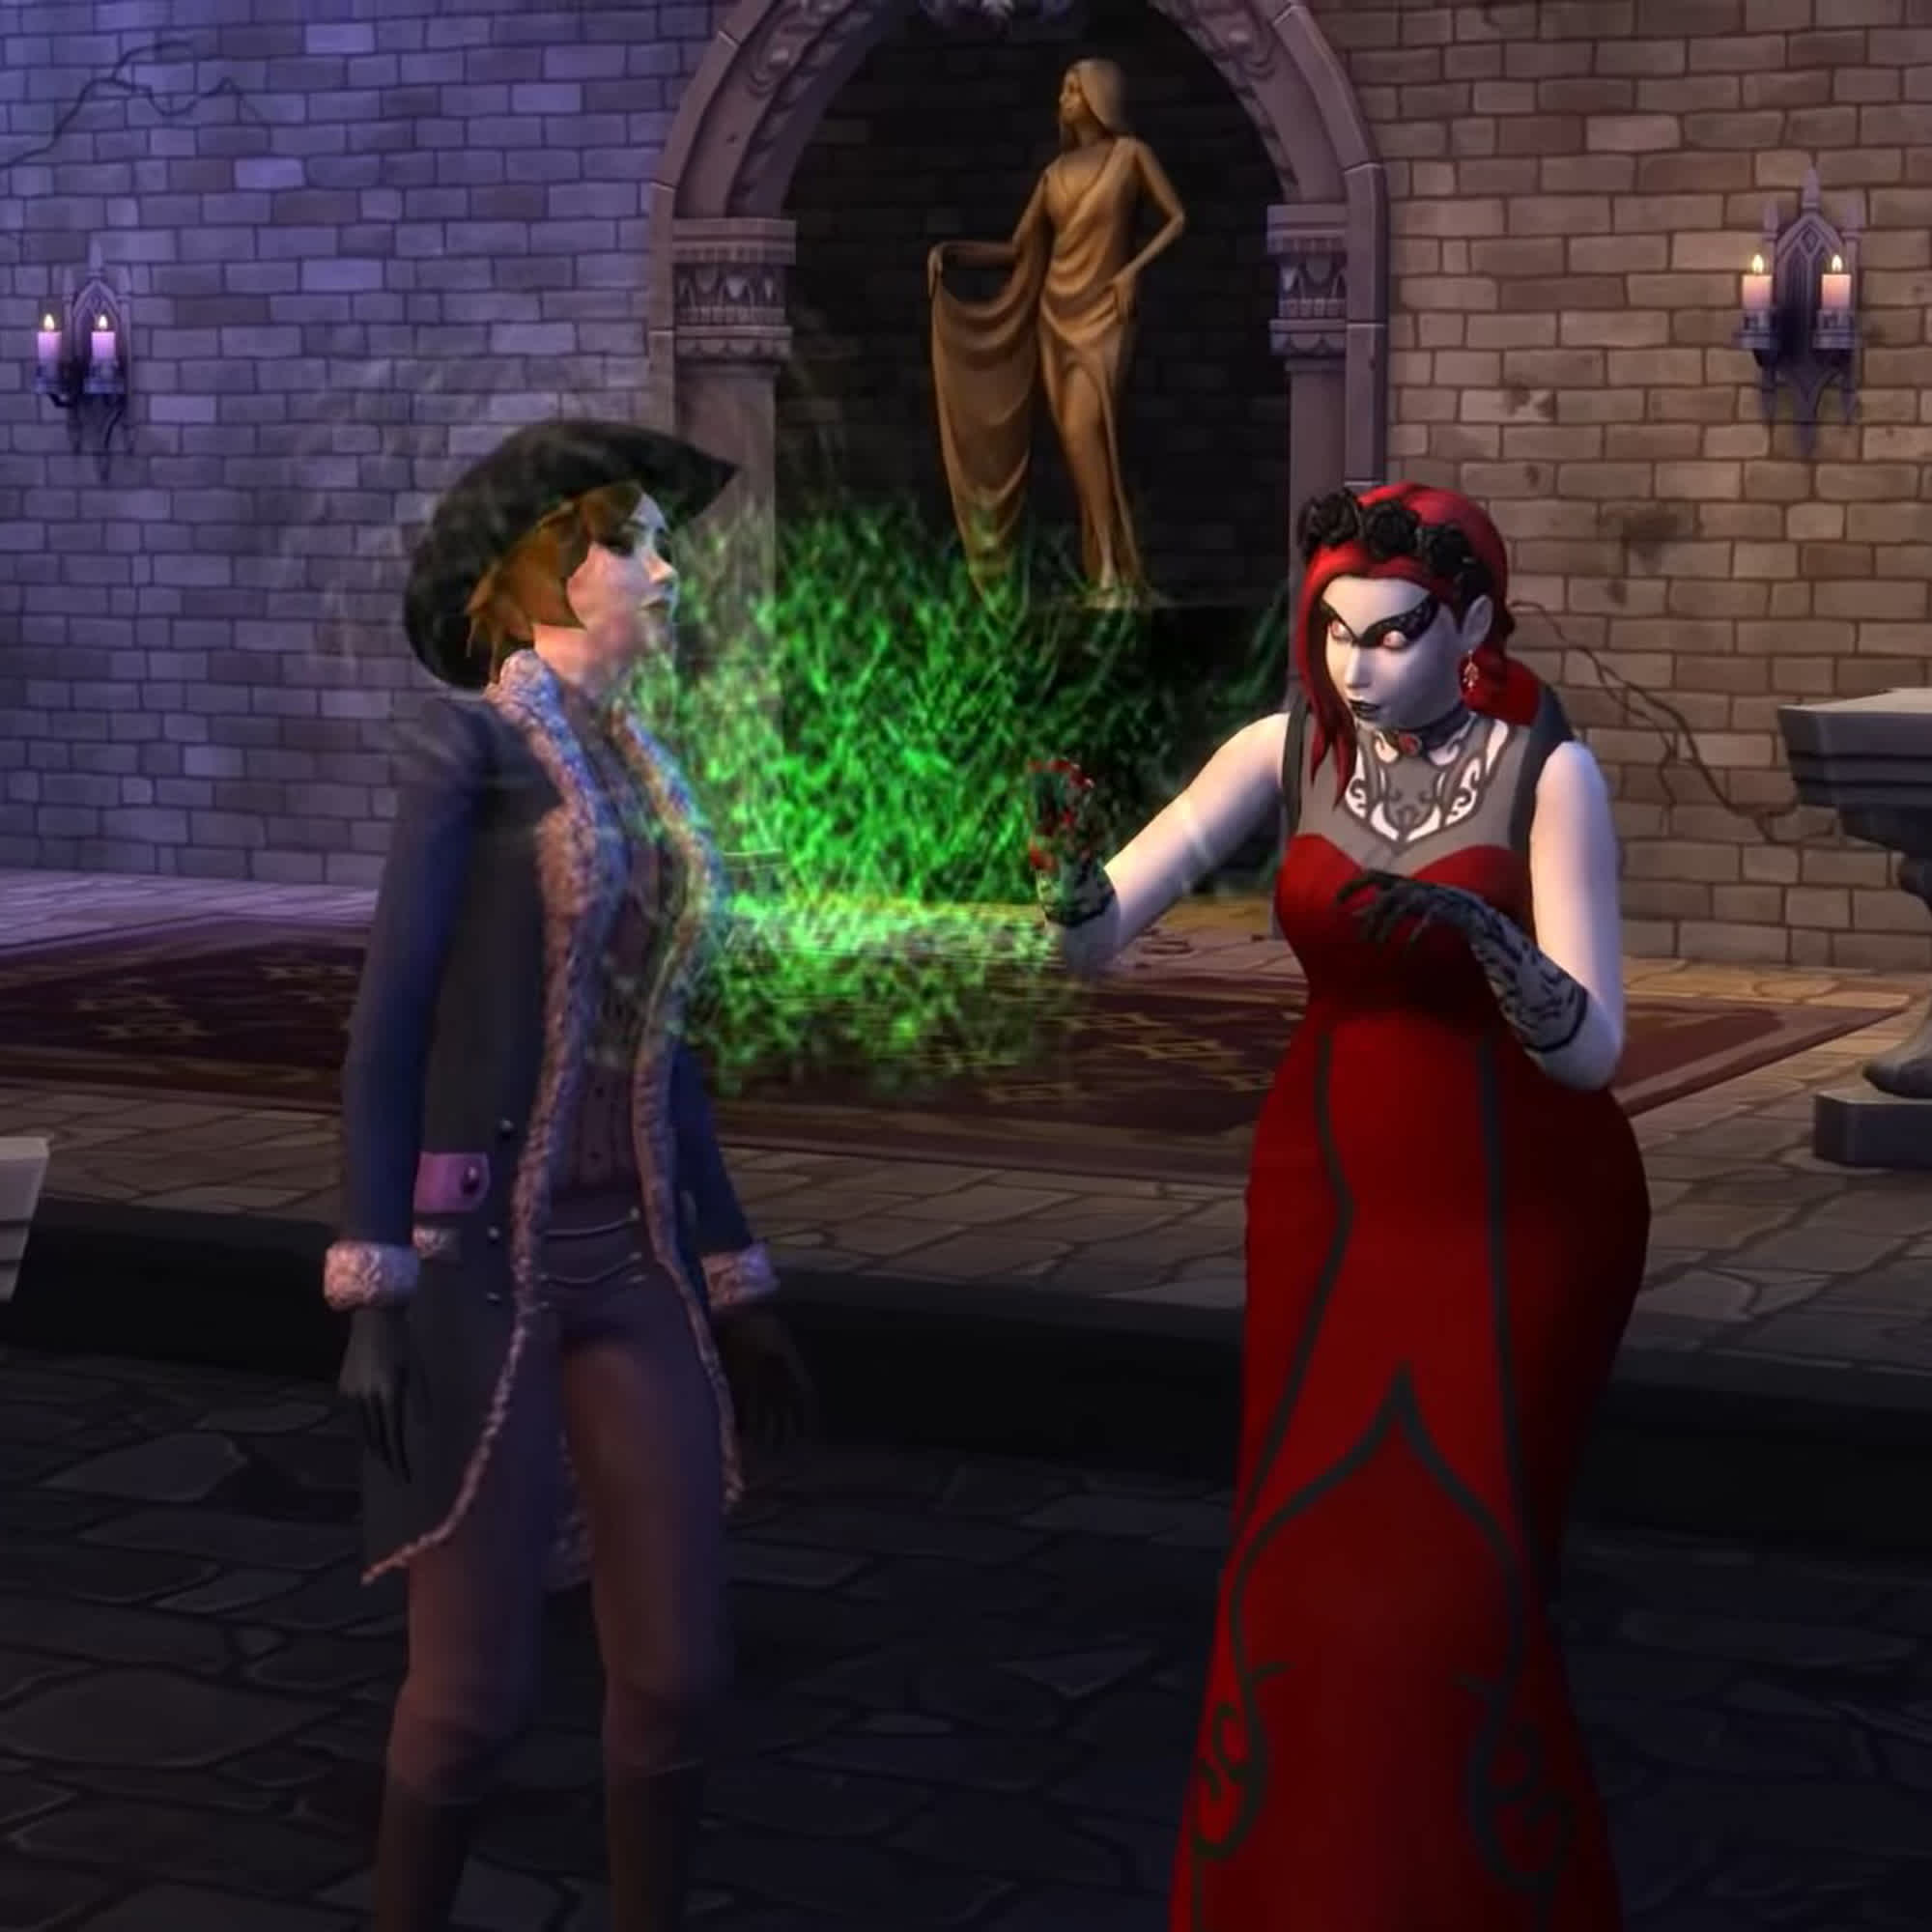 The Sims 4 Vampire game pack.